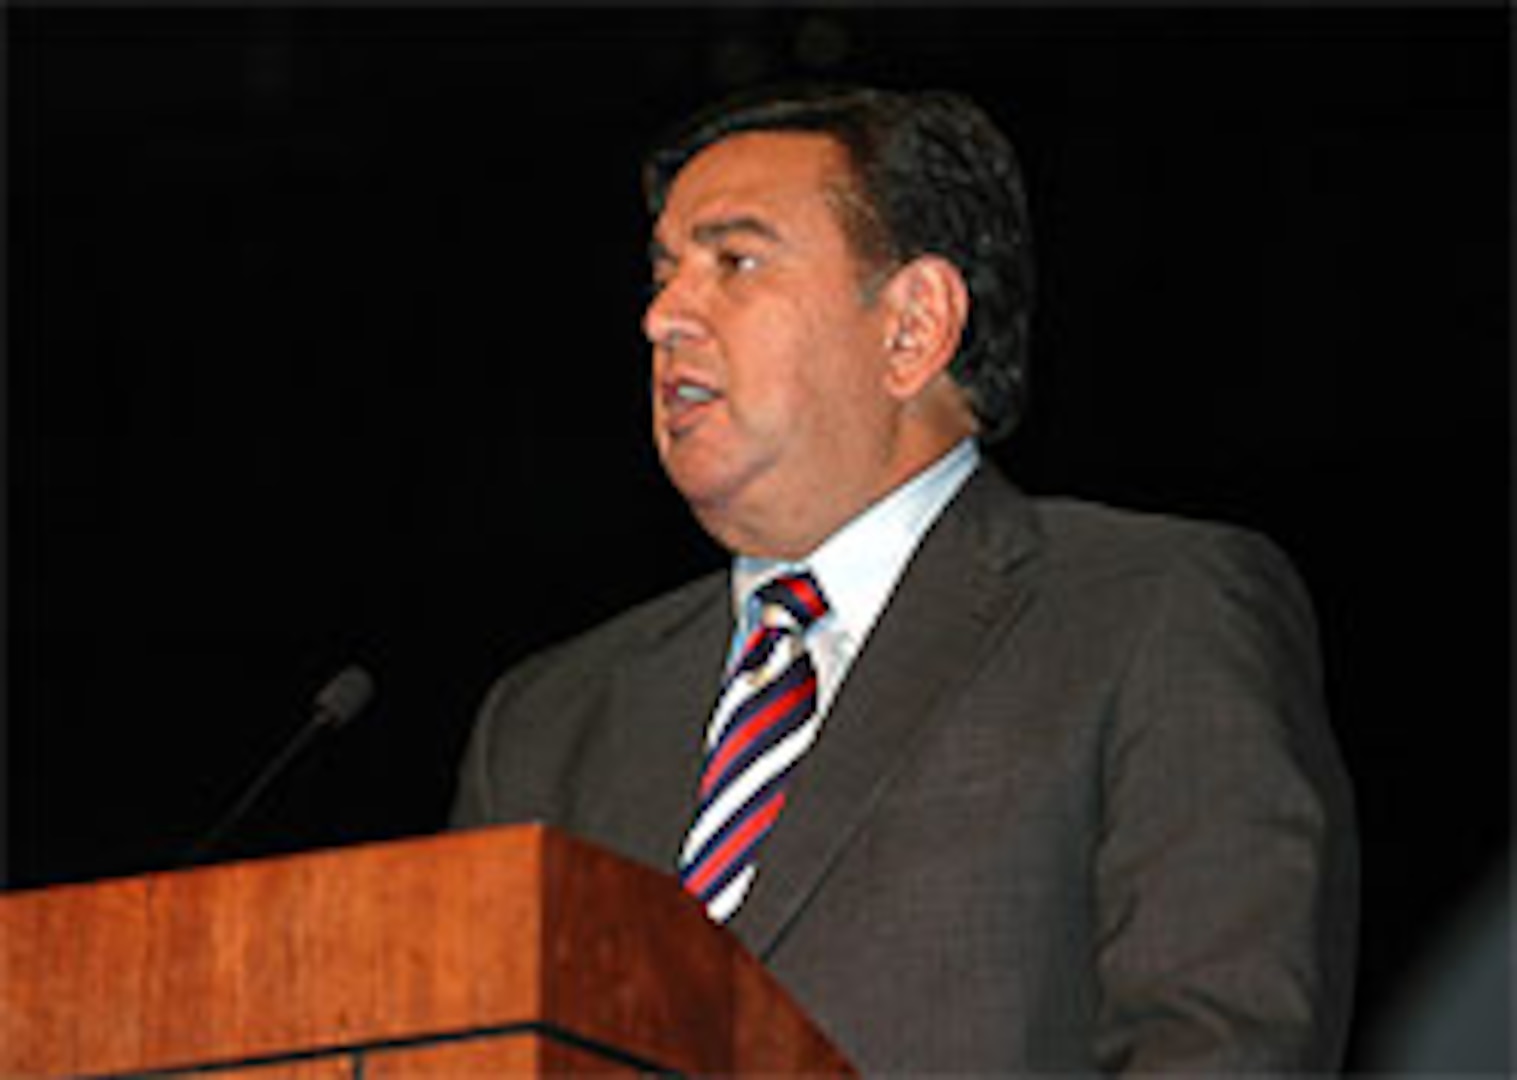 Gov. Bill Richardson of New Mexico addresses the 128th General Conference of the National Guard Association of the United States in Albuquerque, N.M., on Sept. 18, 2006.